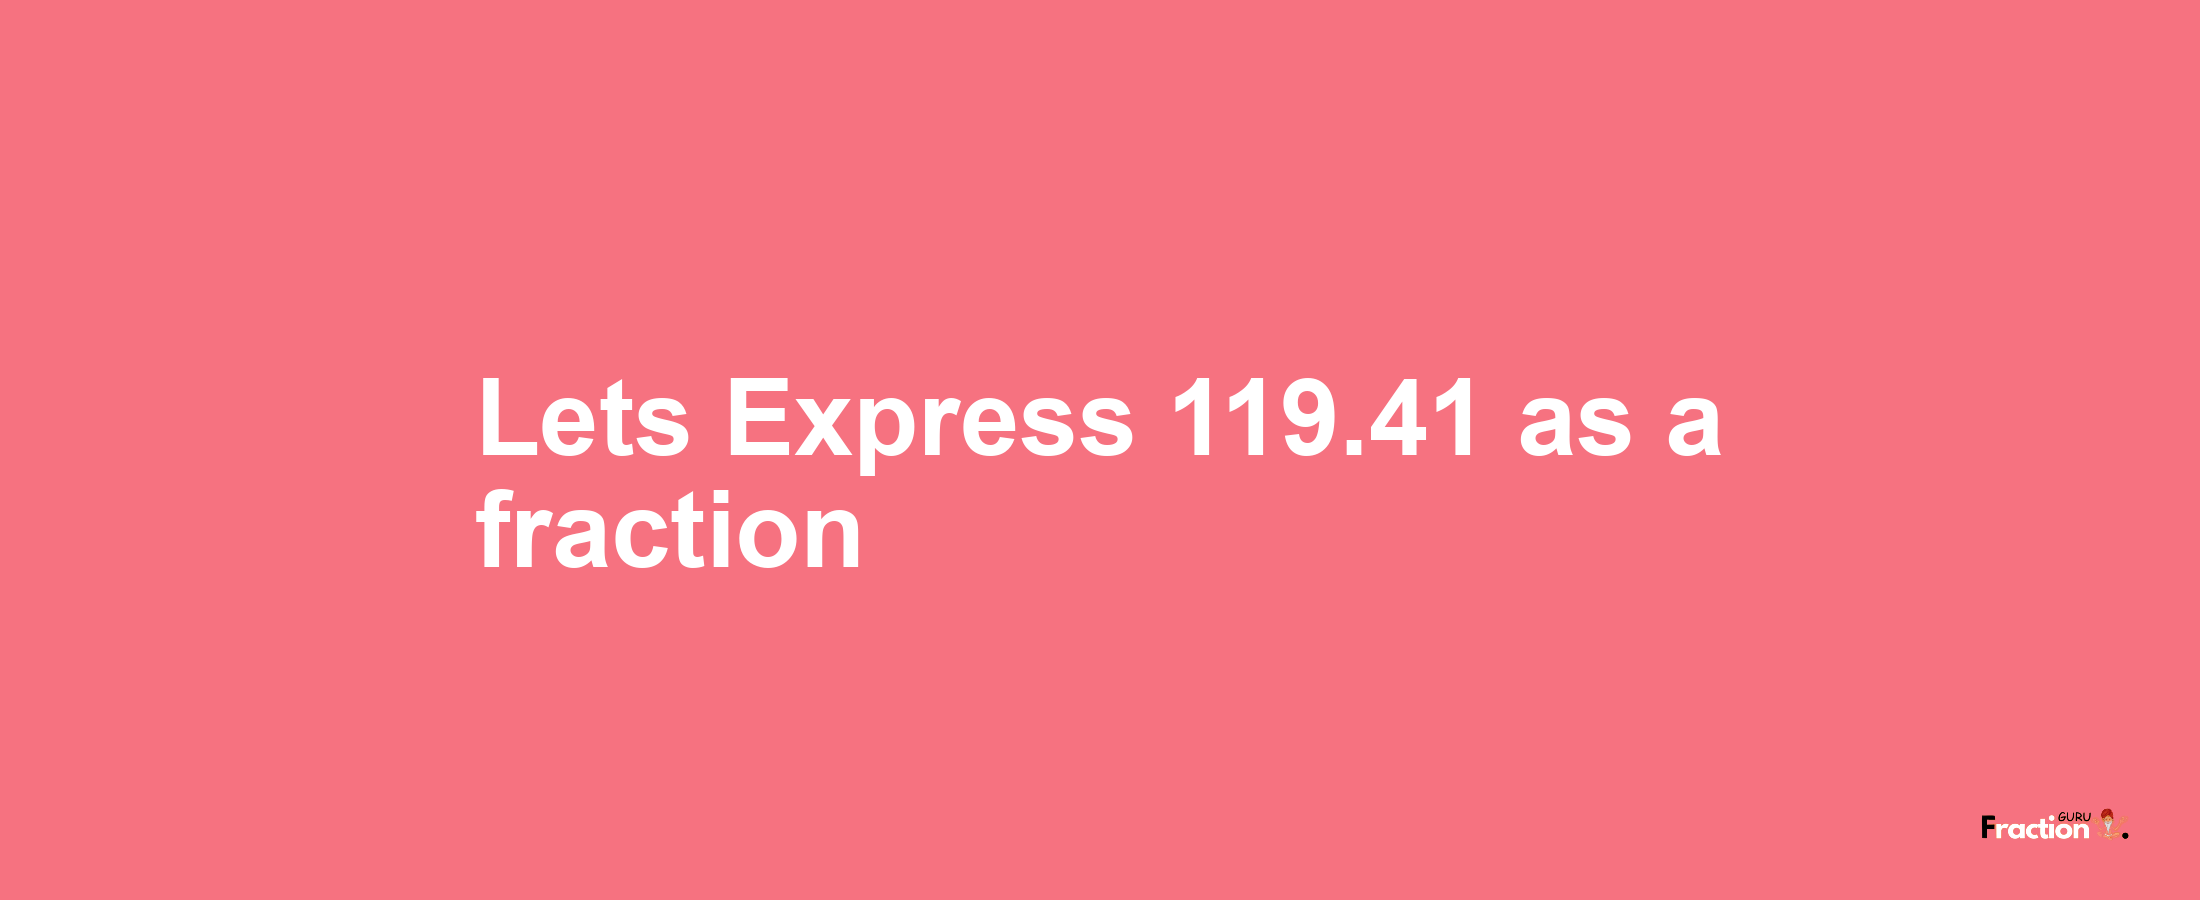 Lets Express 119.41 as afraction